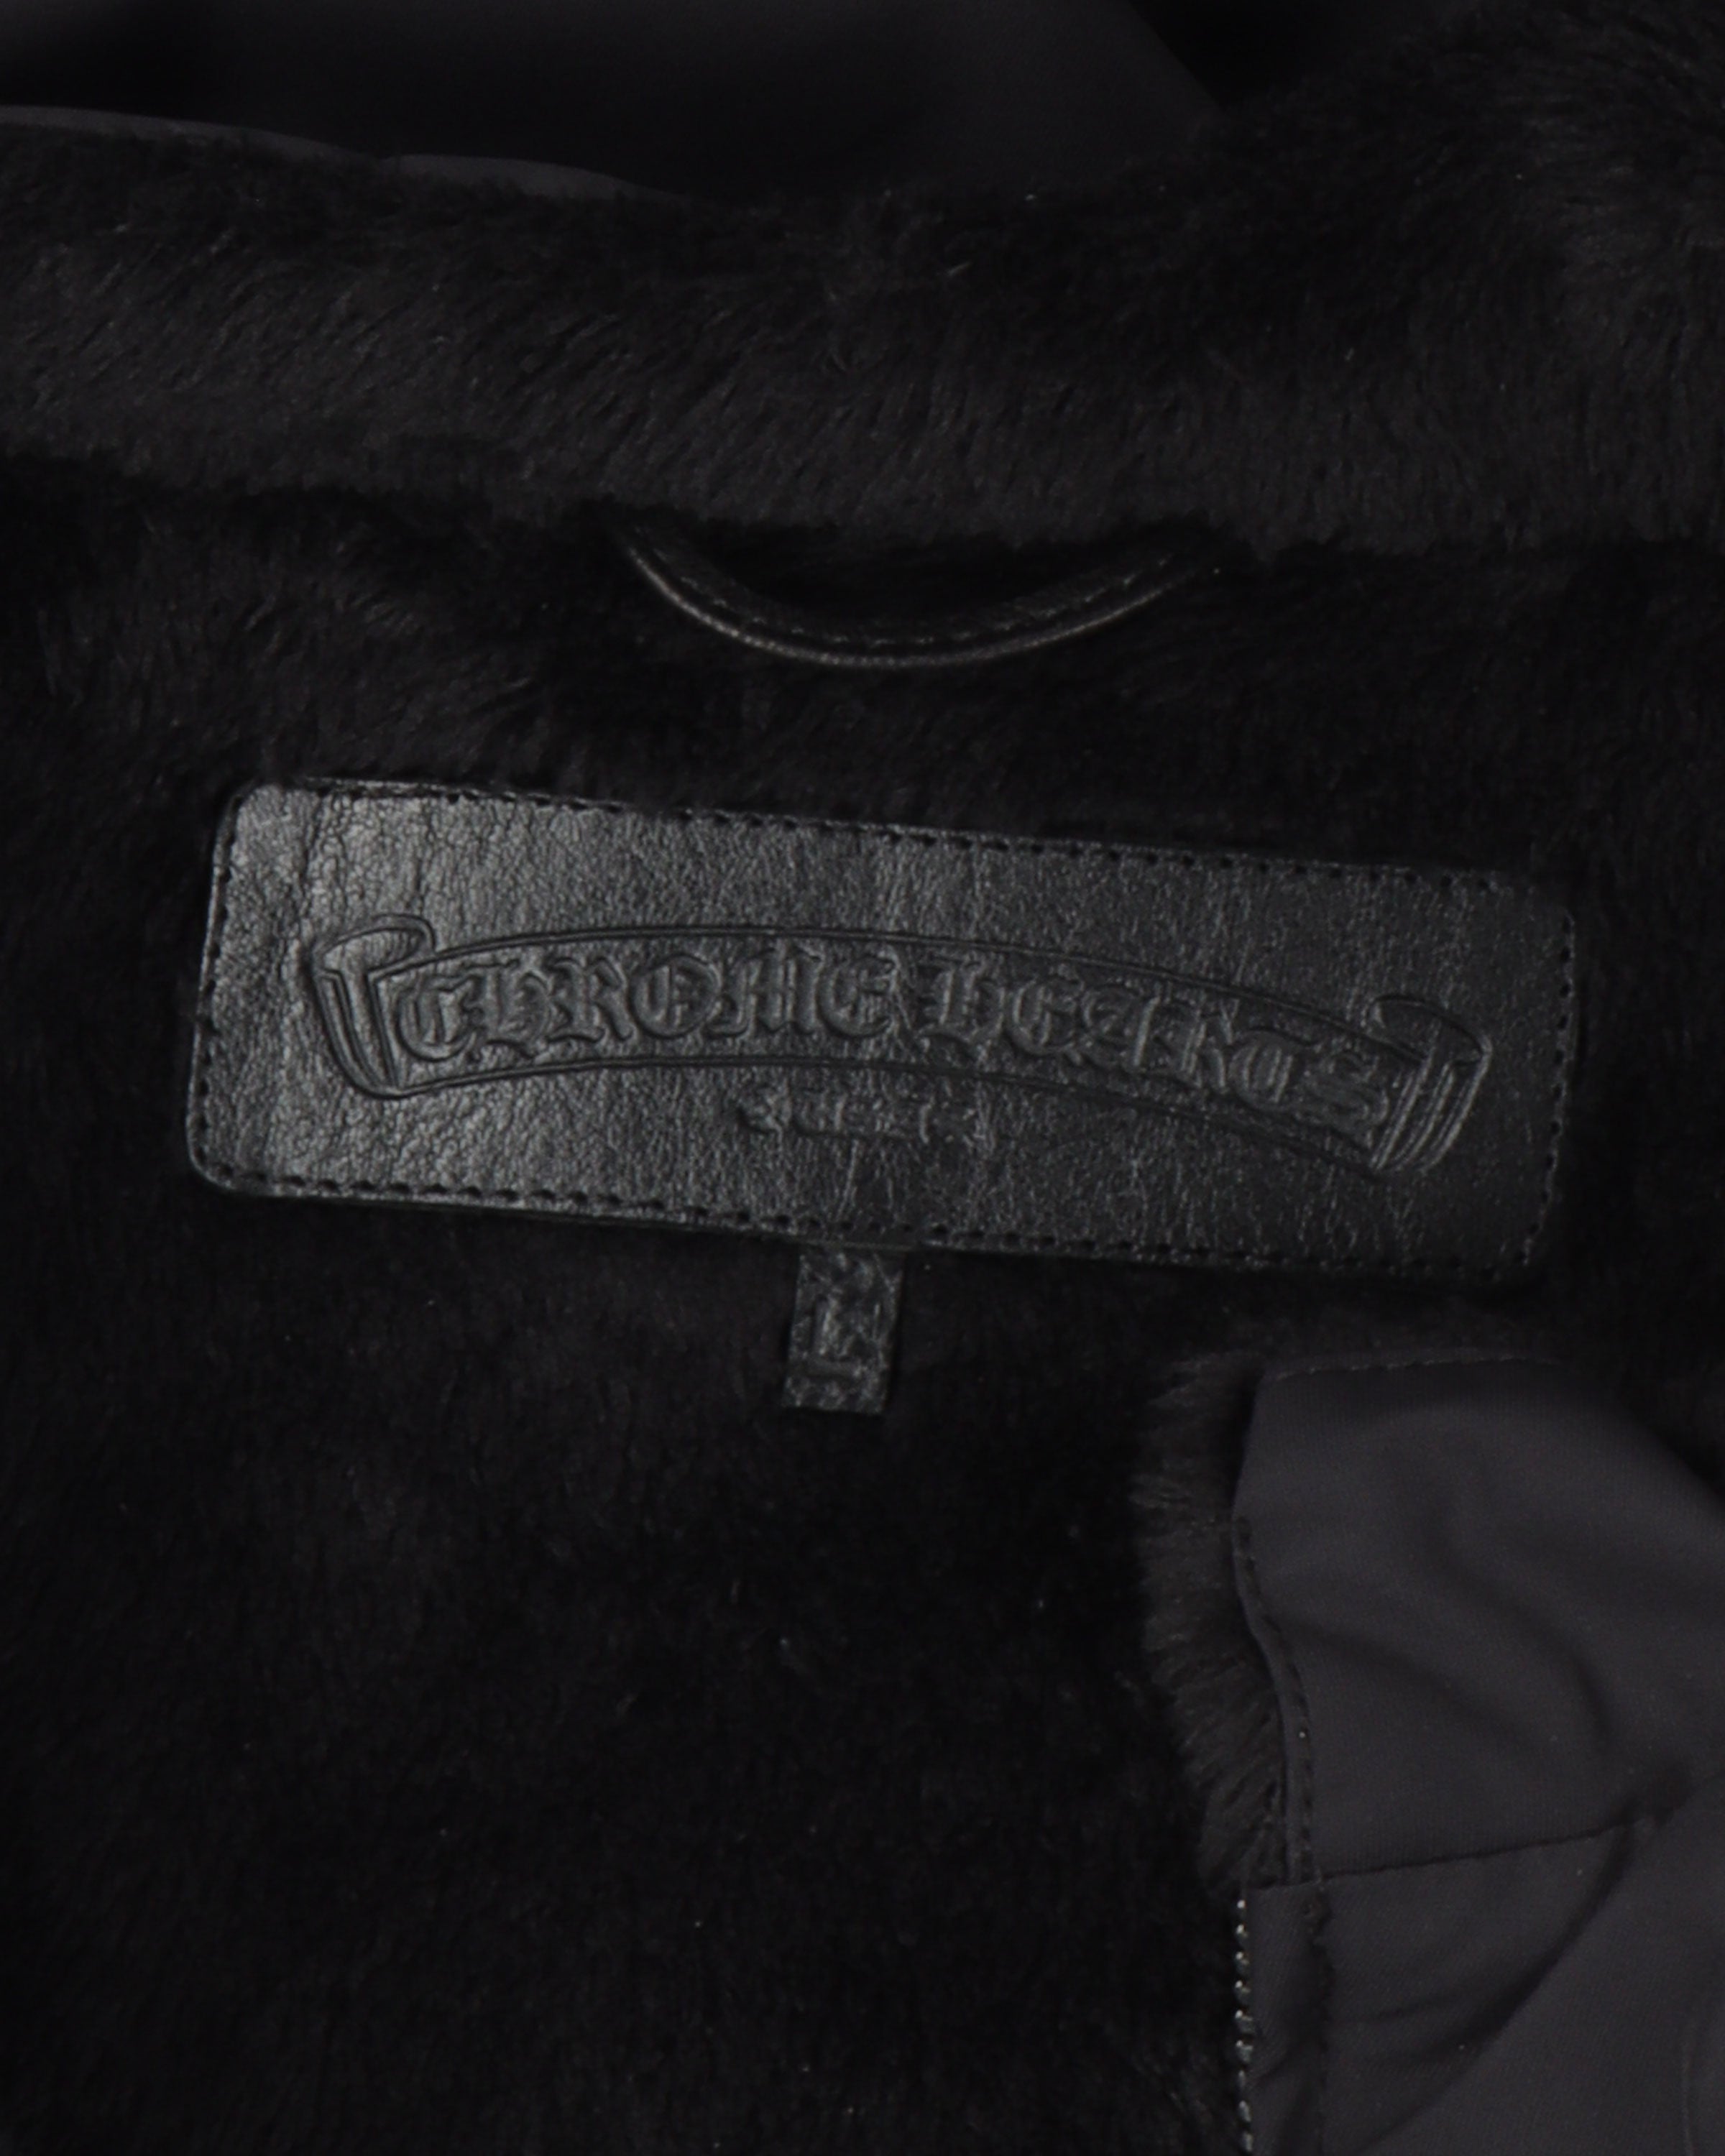 Faux Fur Lined Cemetery Cross Patch Racing Jacket